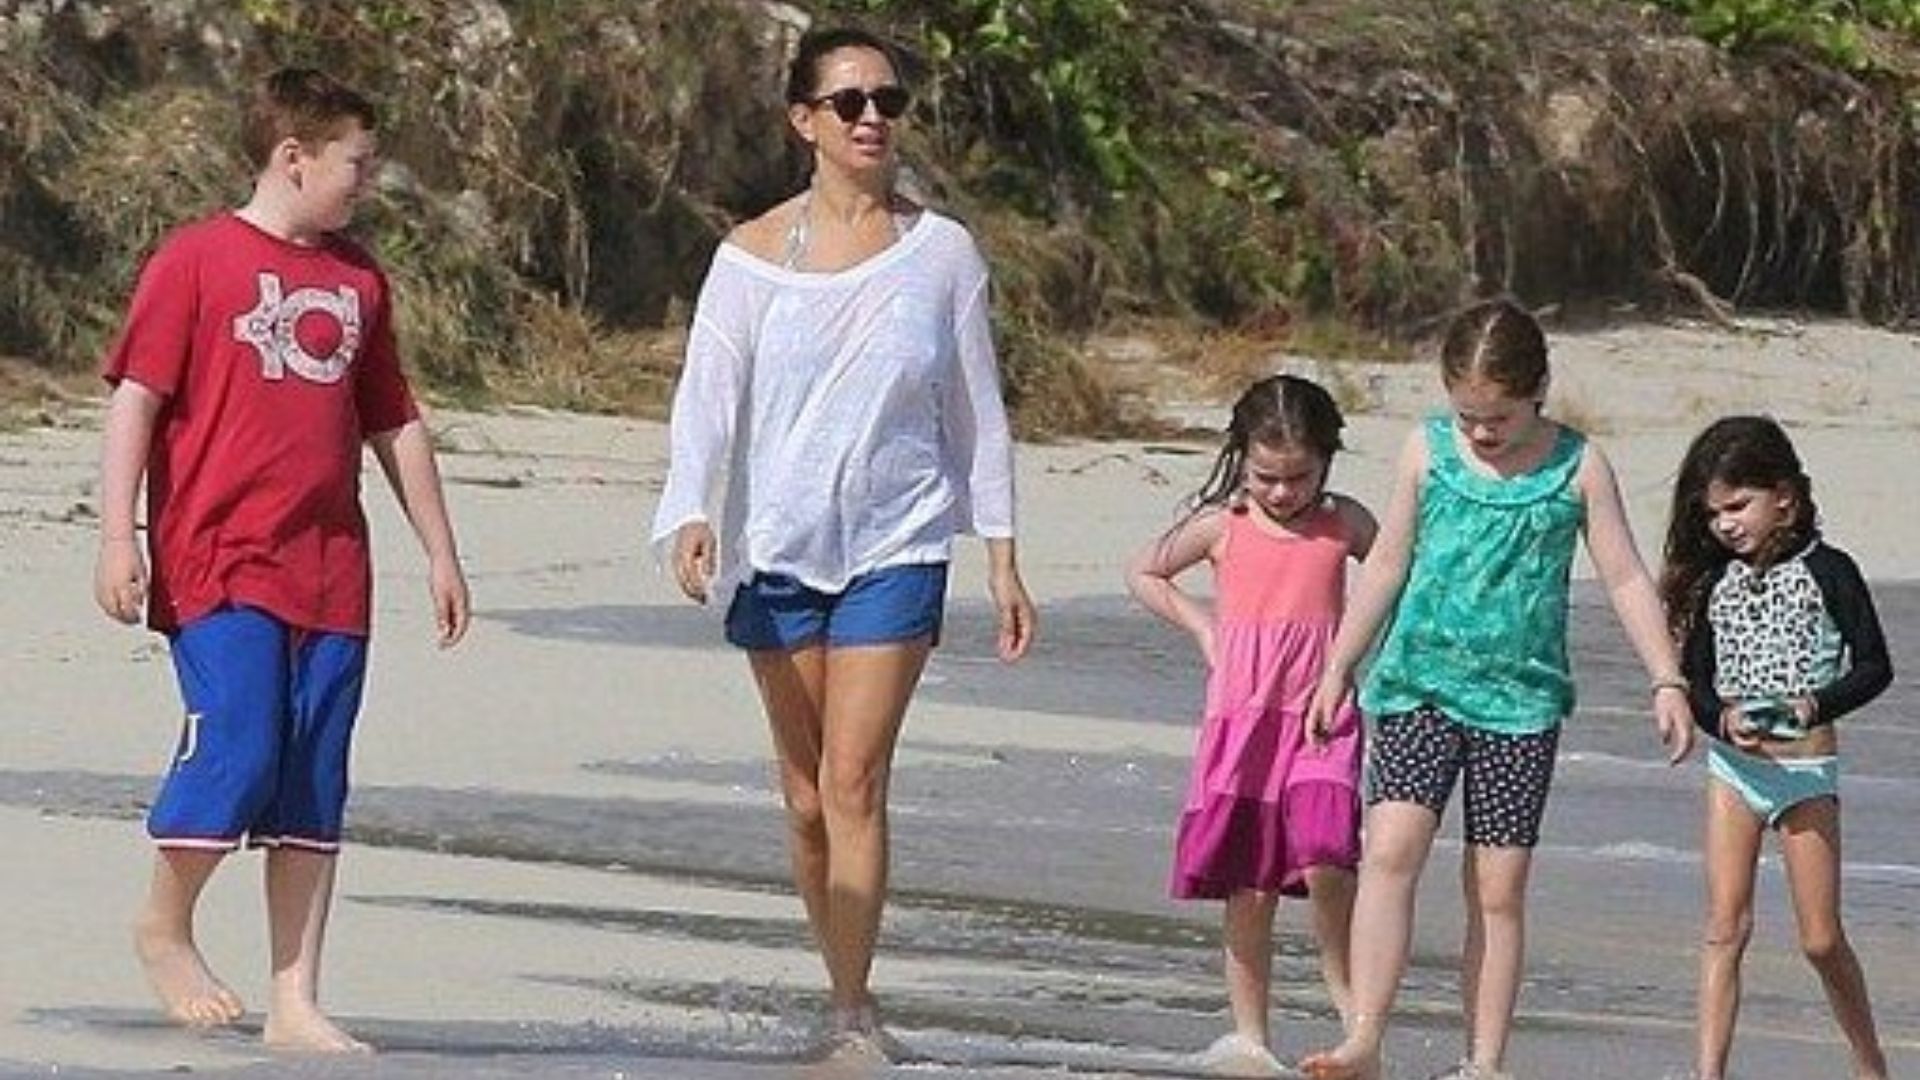 Maya Rudolph with her kids walking in the beach